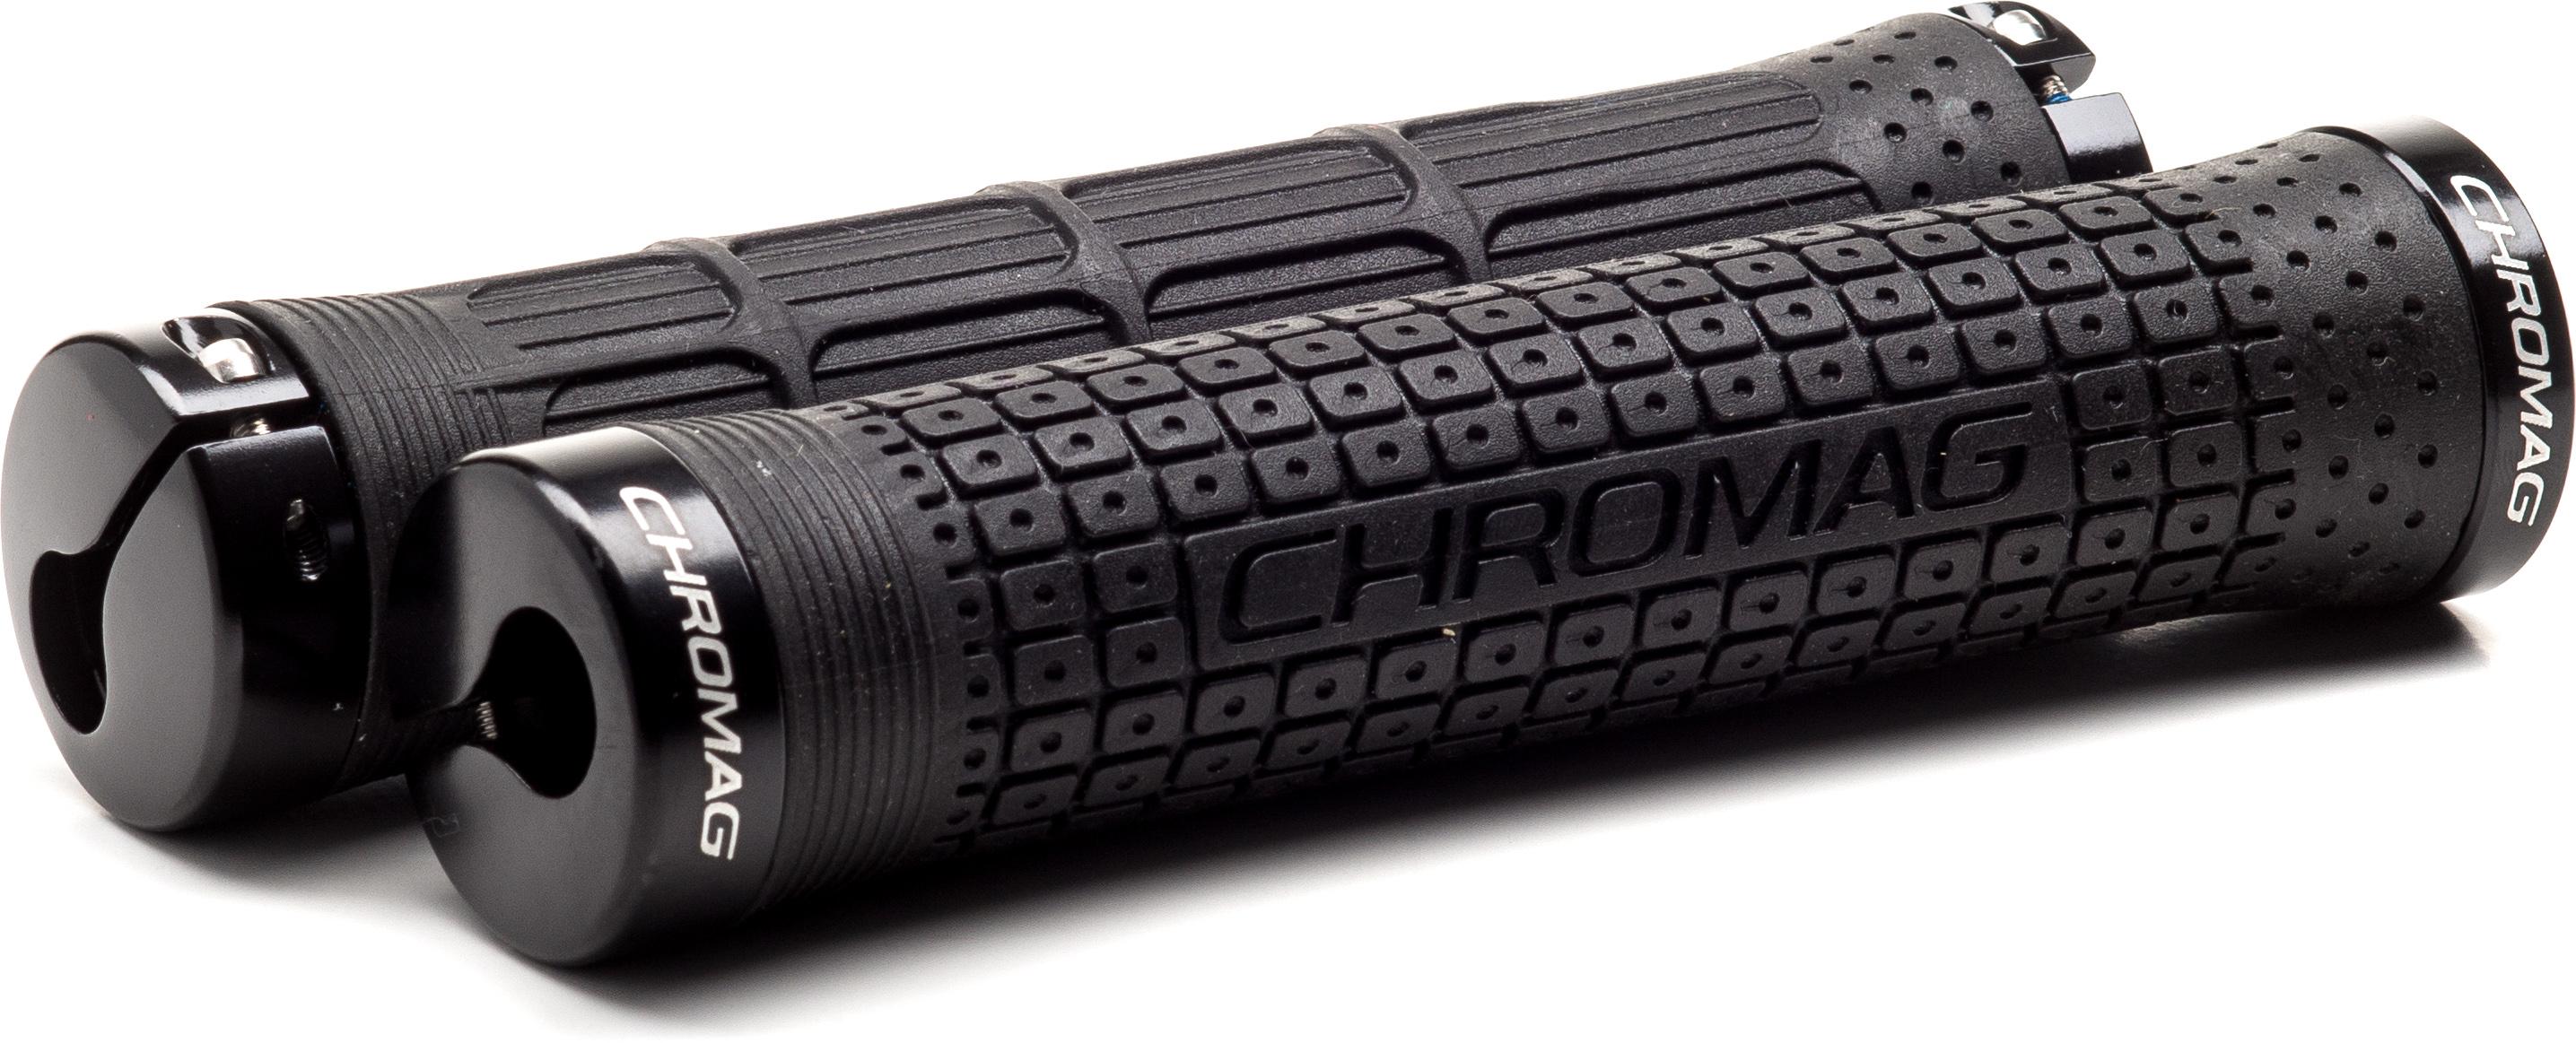 Image of Chromag Clutch Grips - Black